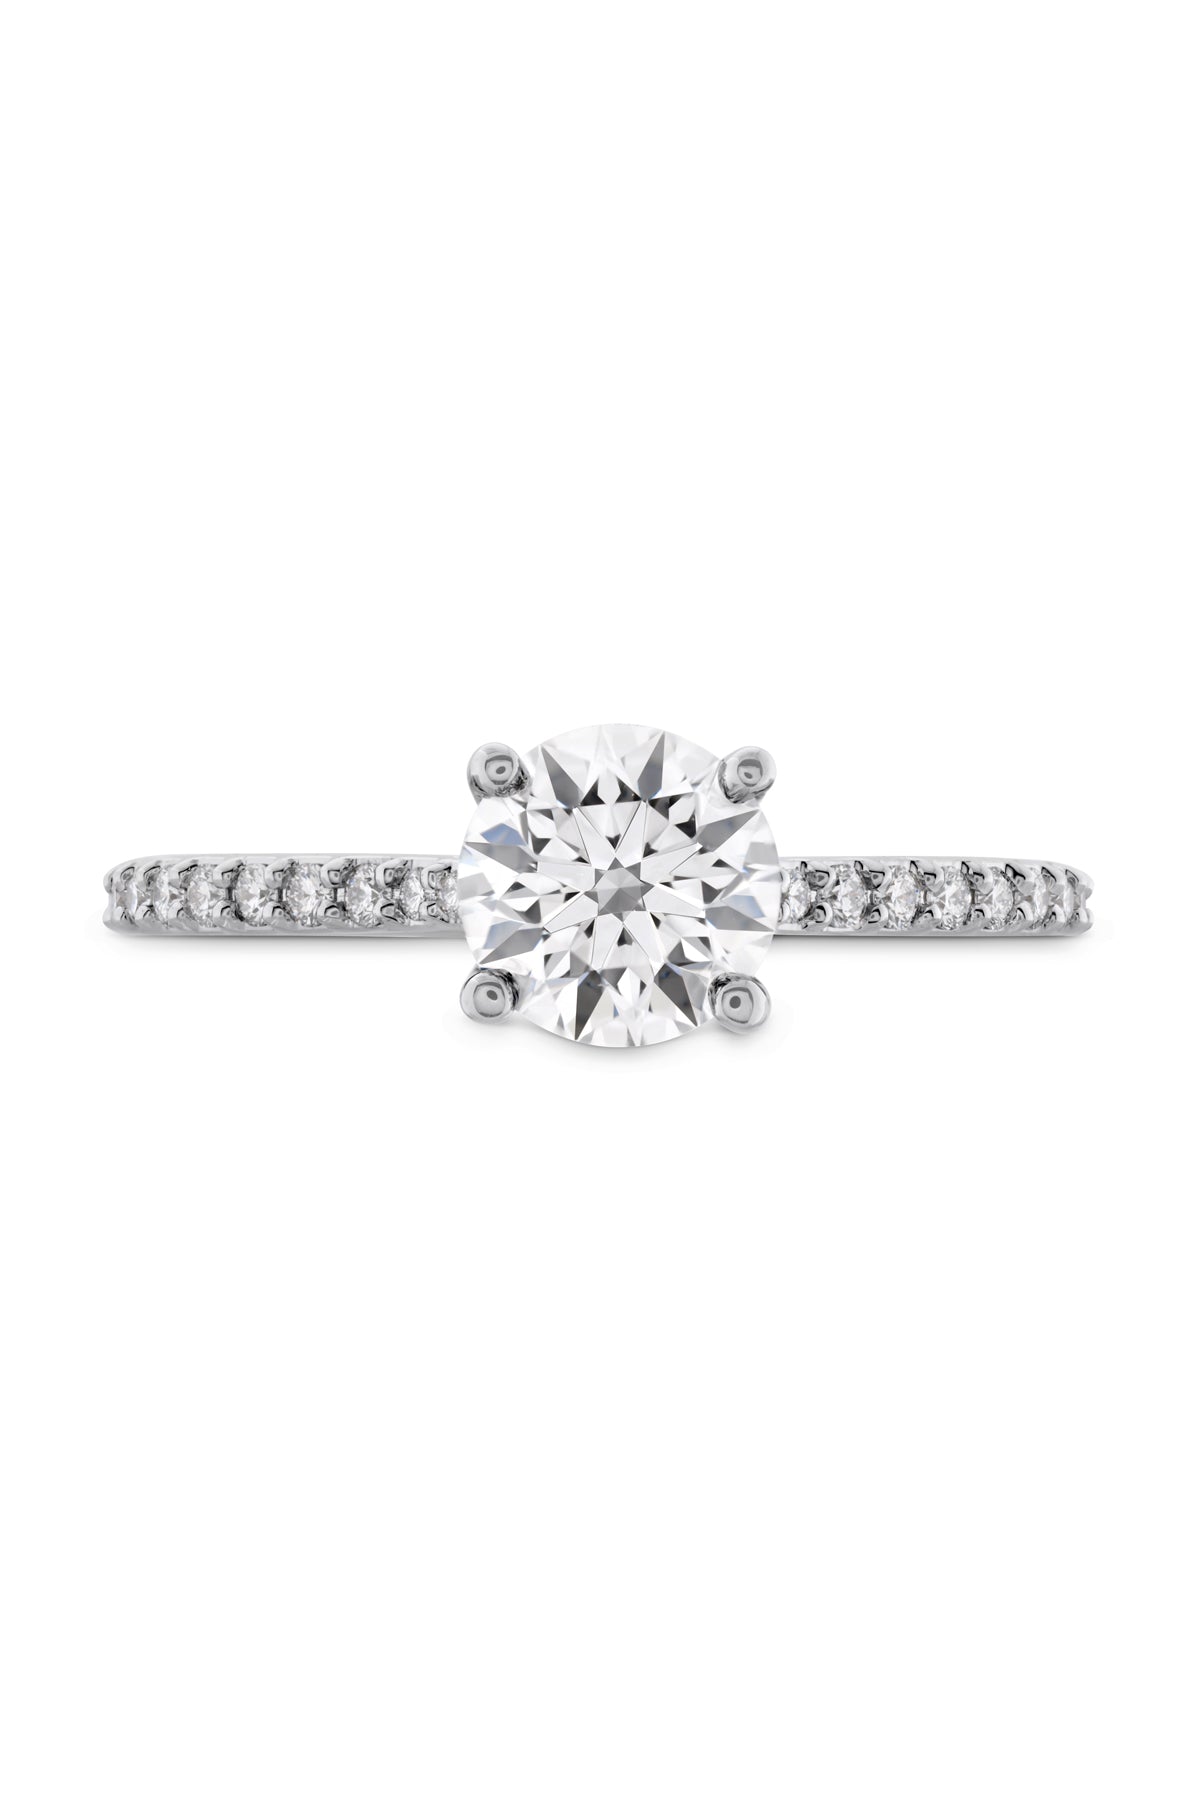 Camilla Engagement Ring From Hearts On Fire available at LeGassick Diamonds and Jewellery Gold Coast, Australia.